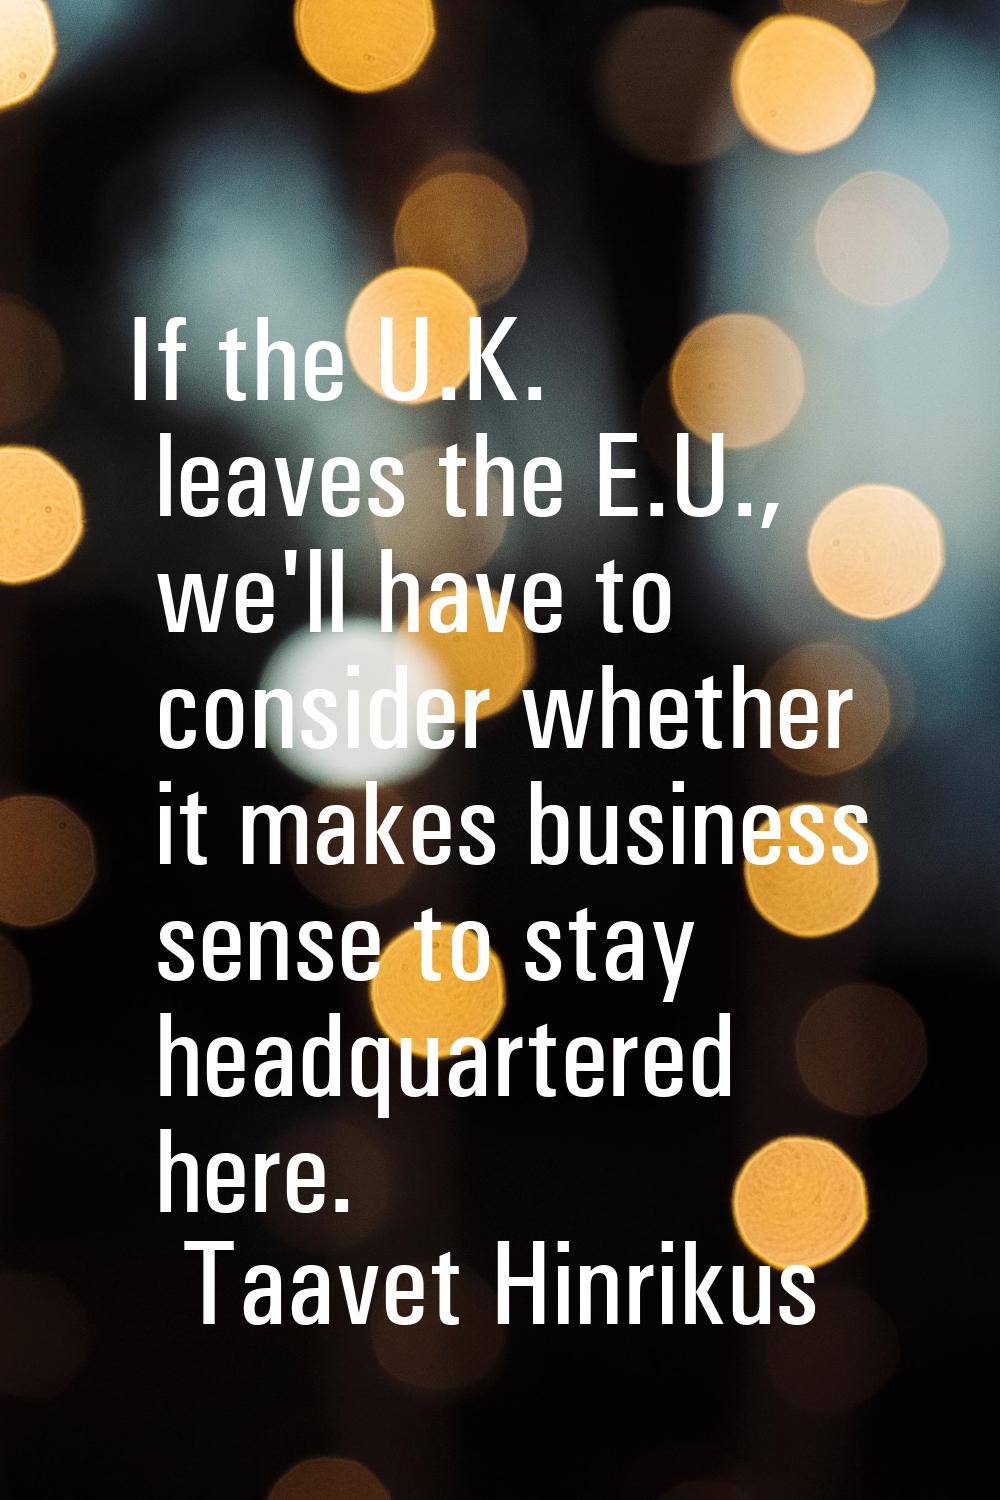 If the U.K. leaves the E.U., we'll have to consider whether it makes business sense to stay headqua